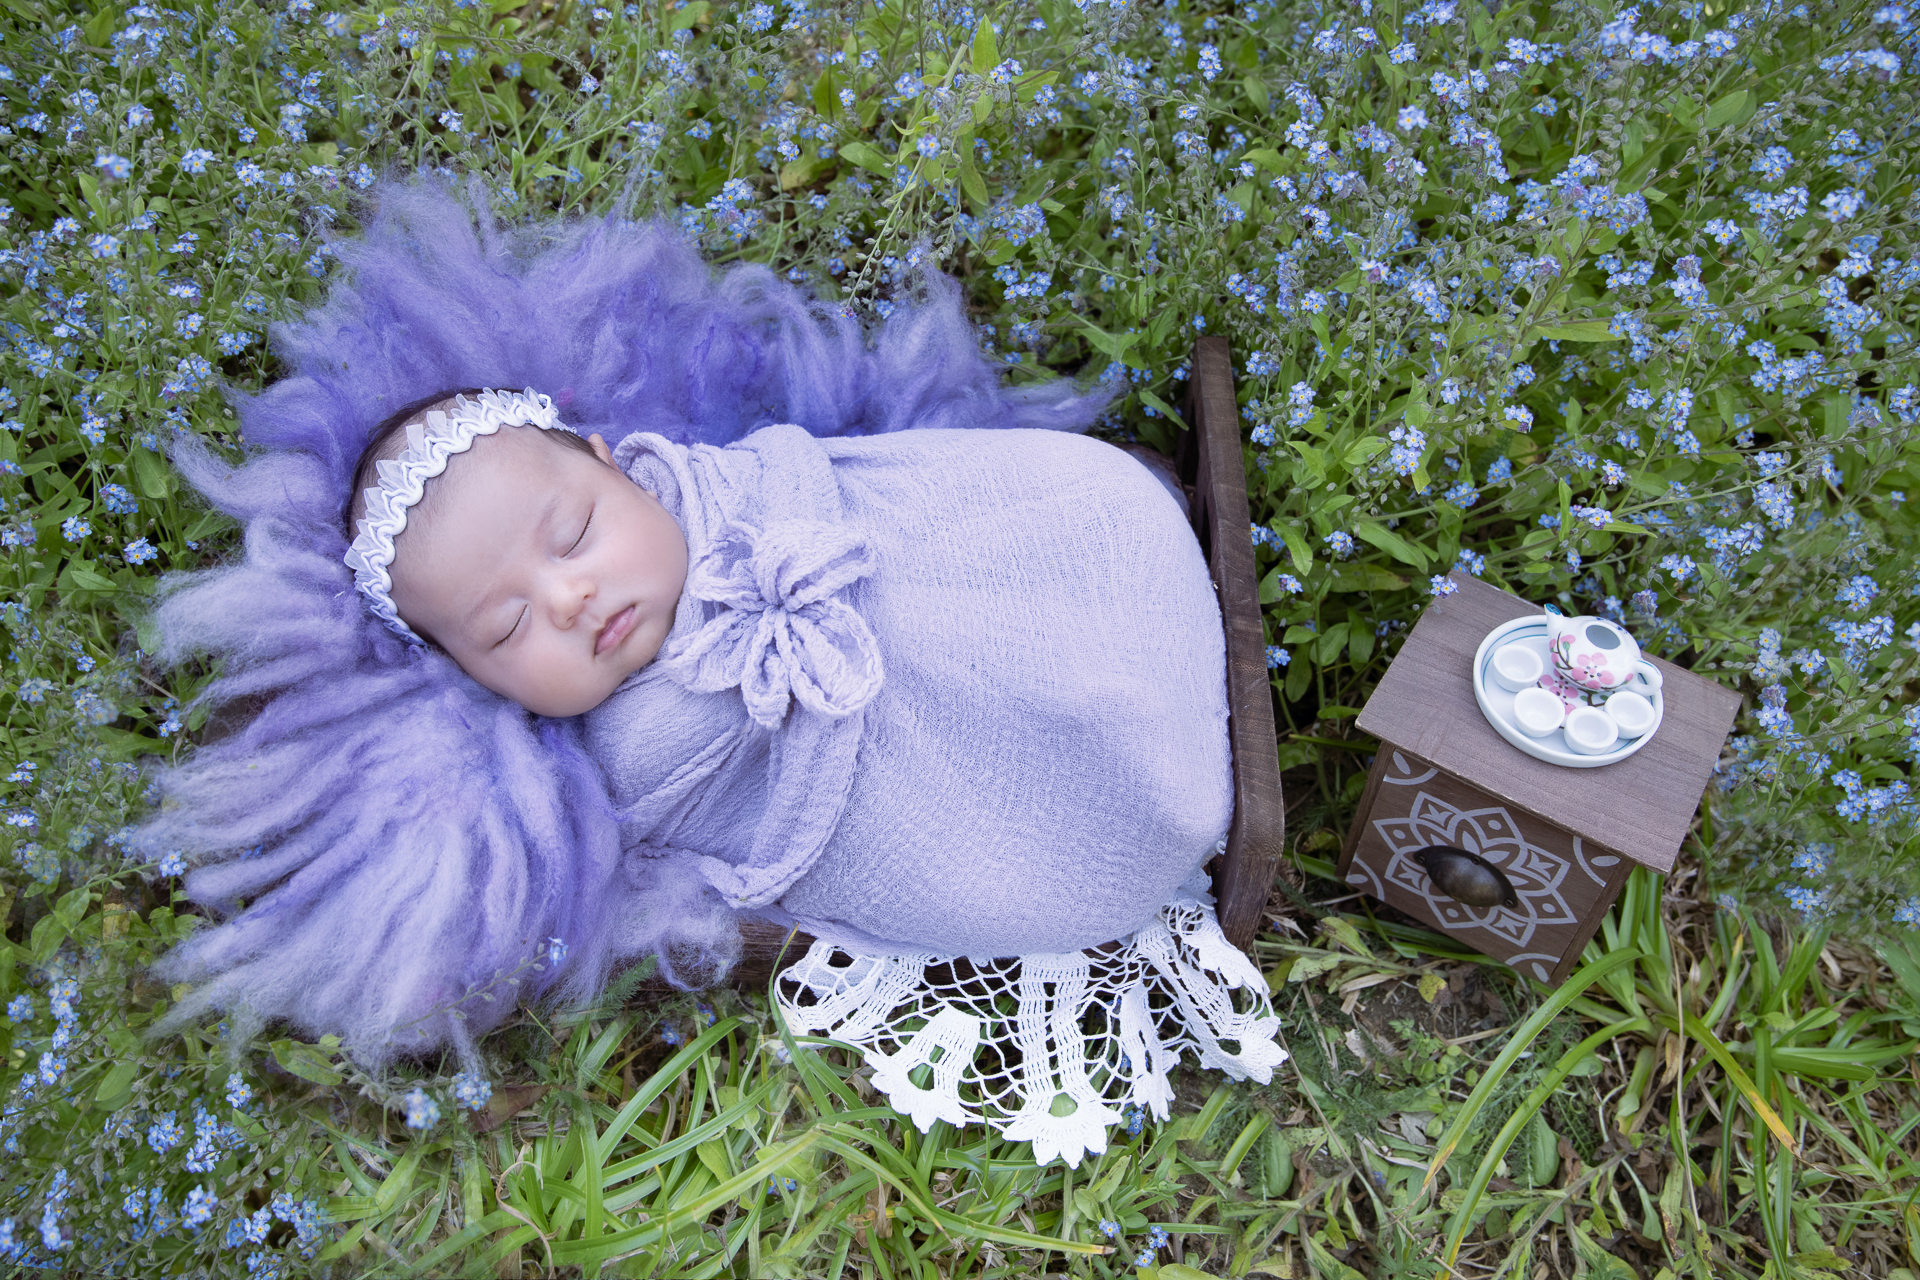 Newborn girl rest on wood bed prop outdoors. Purple wrap, white headband. Purple flowers sourrounding her. Teapot and tea cups on small table decorating the scene.